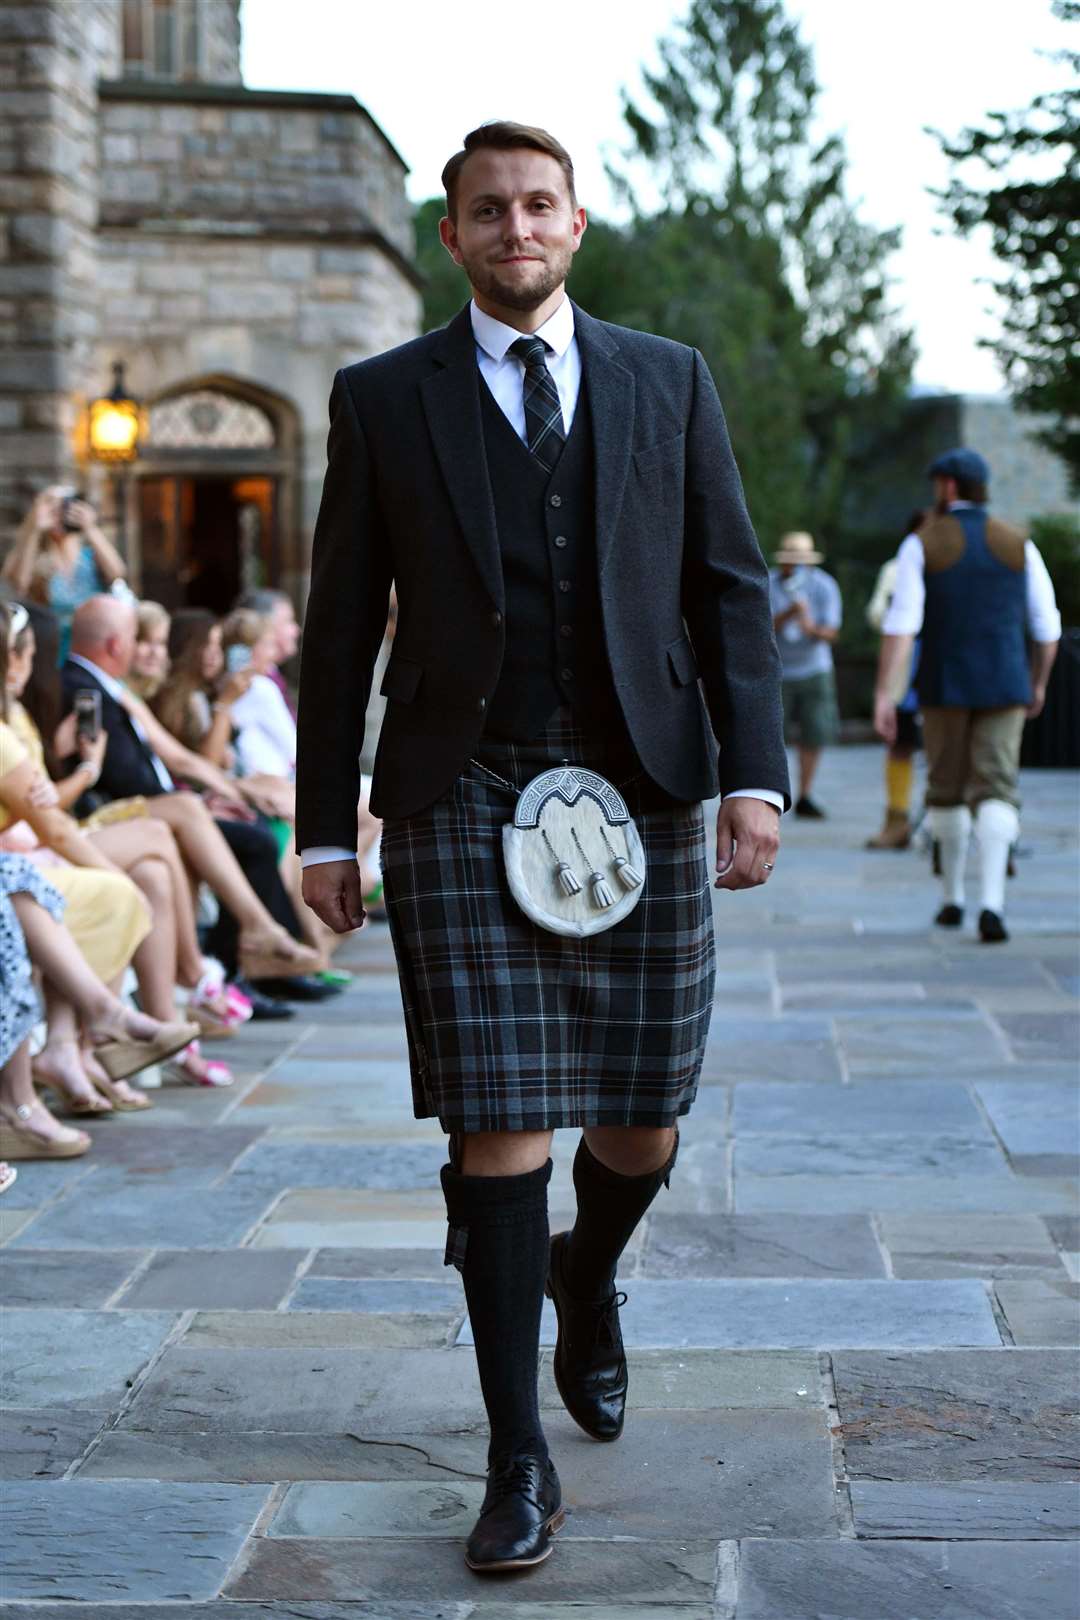 Loch Duart salmon featured at the Dressed to Kilt fashion show.